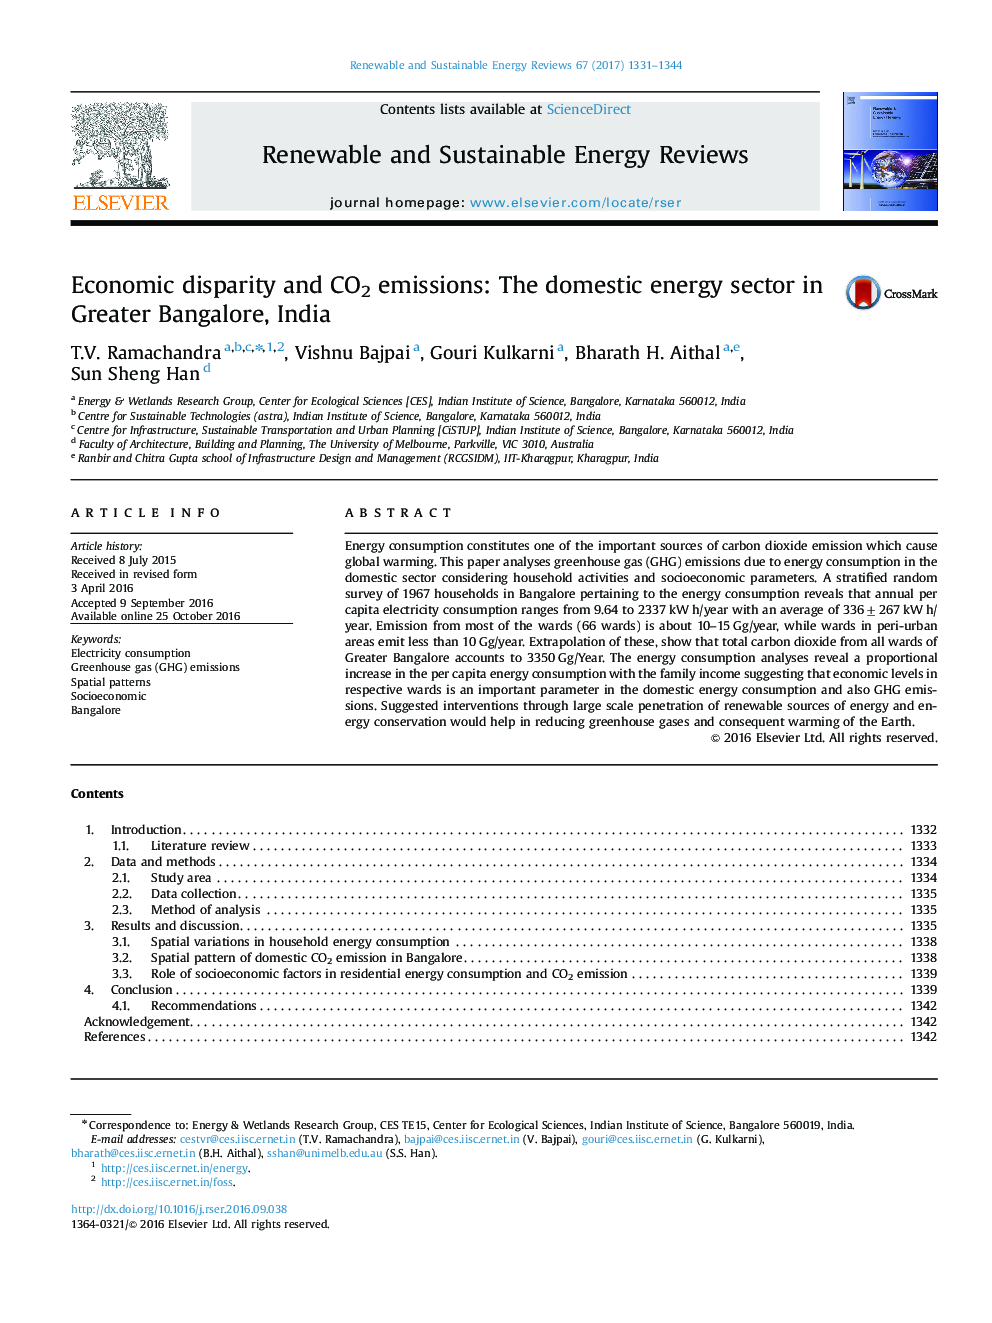 Economic disparity and CO2 emissions: The domestic energy sector in Greater Bangalore, India